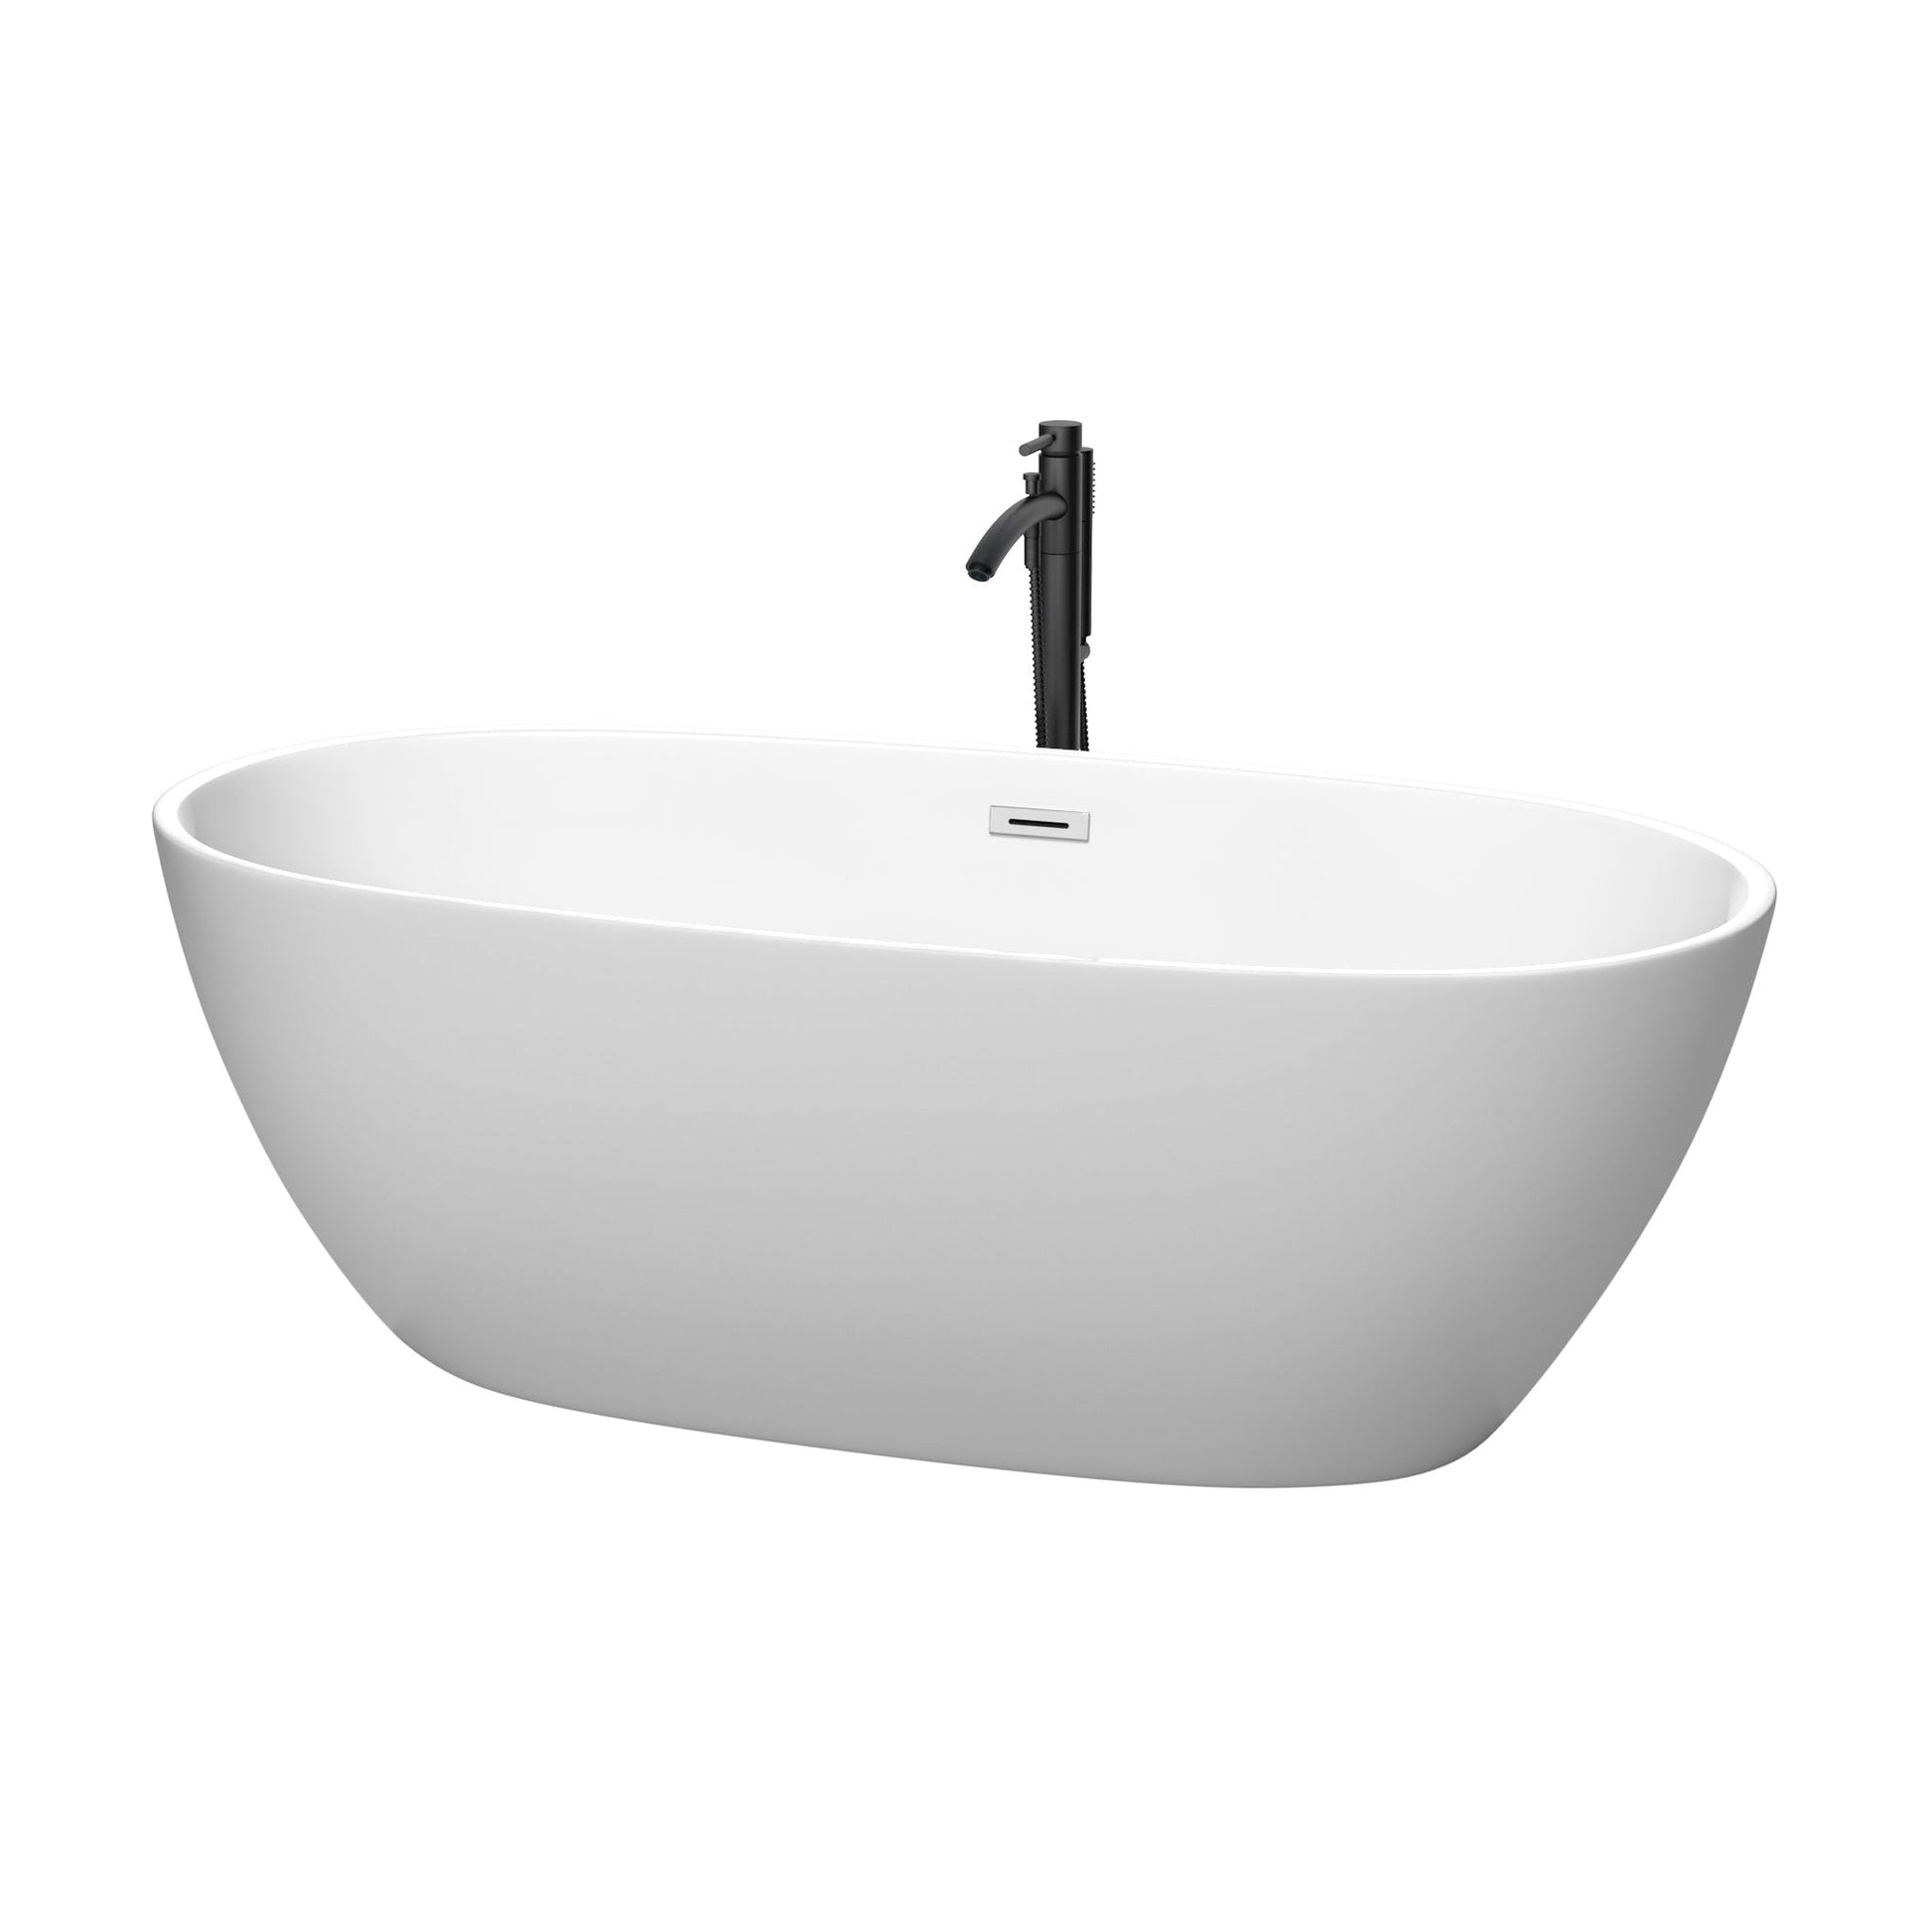 Wyndham Collection Juno 67" Freestanding Bathtub in Matte White With Polished Chrome Trim and Floor Mounted Faucet in Matte Black